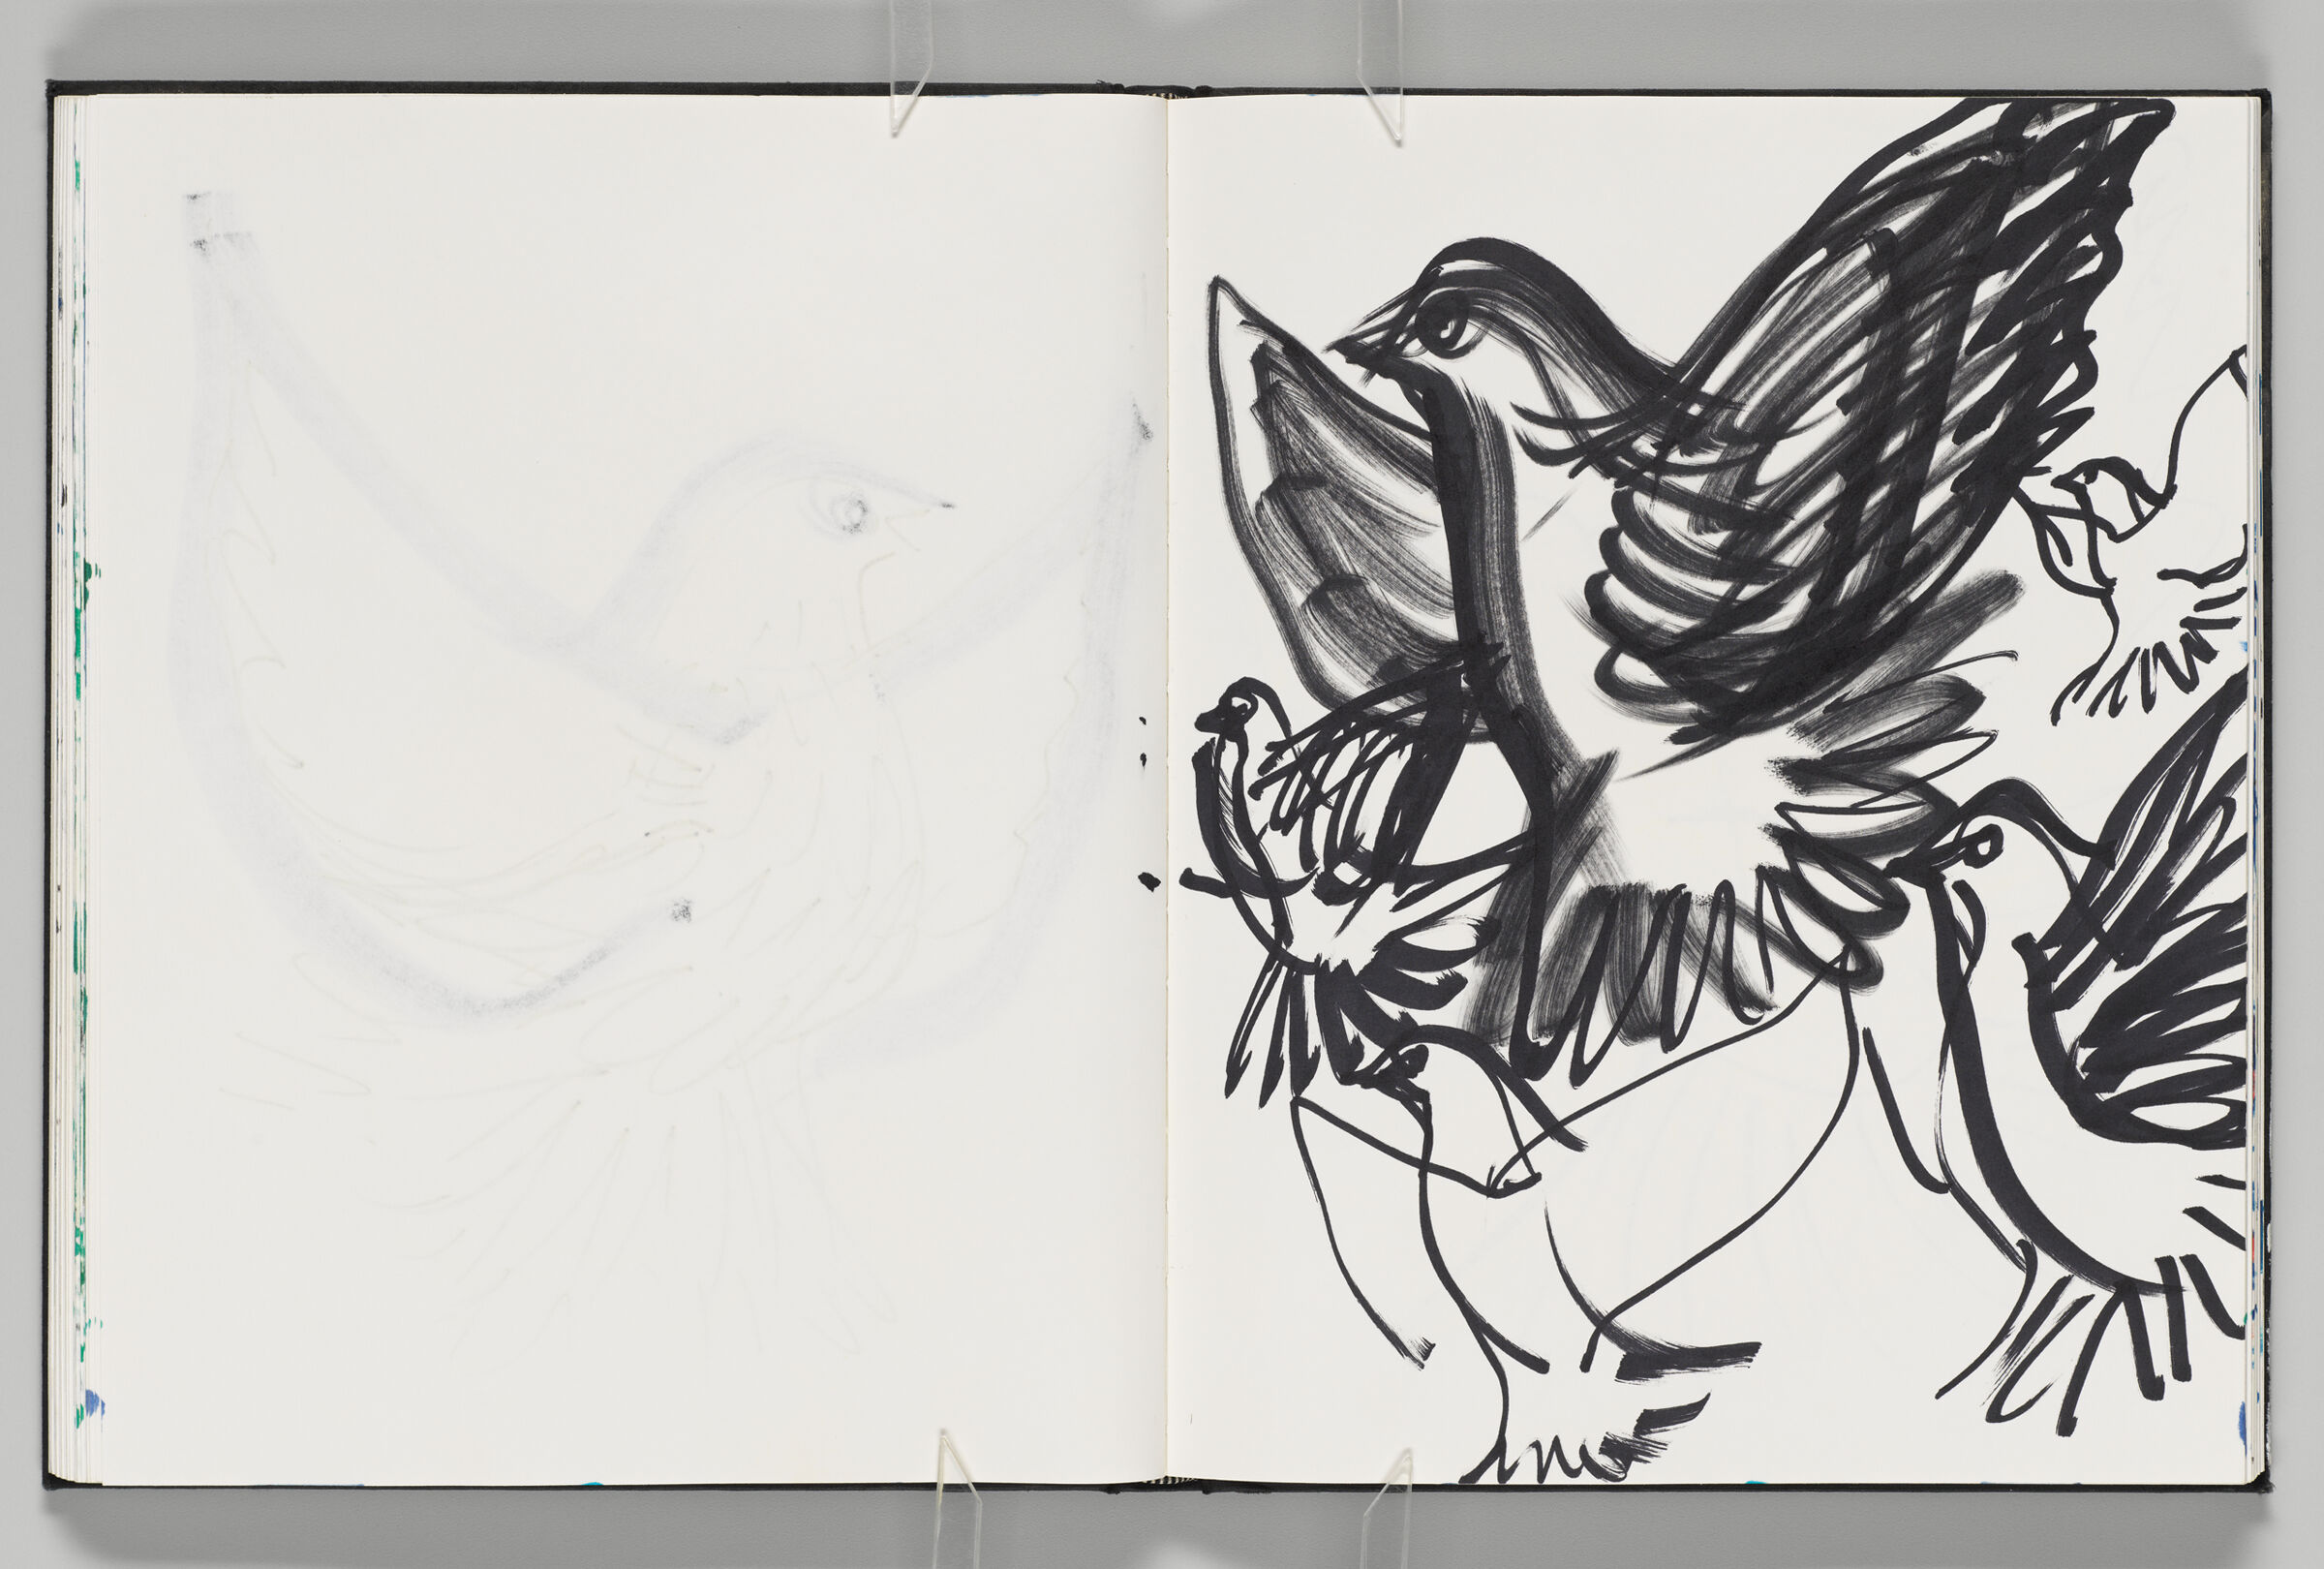 Untitled (Bleed-Through Of Previous Page, Left Page); Untitled (Doves, Right Page)